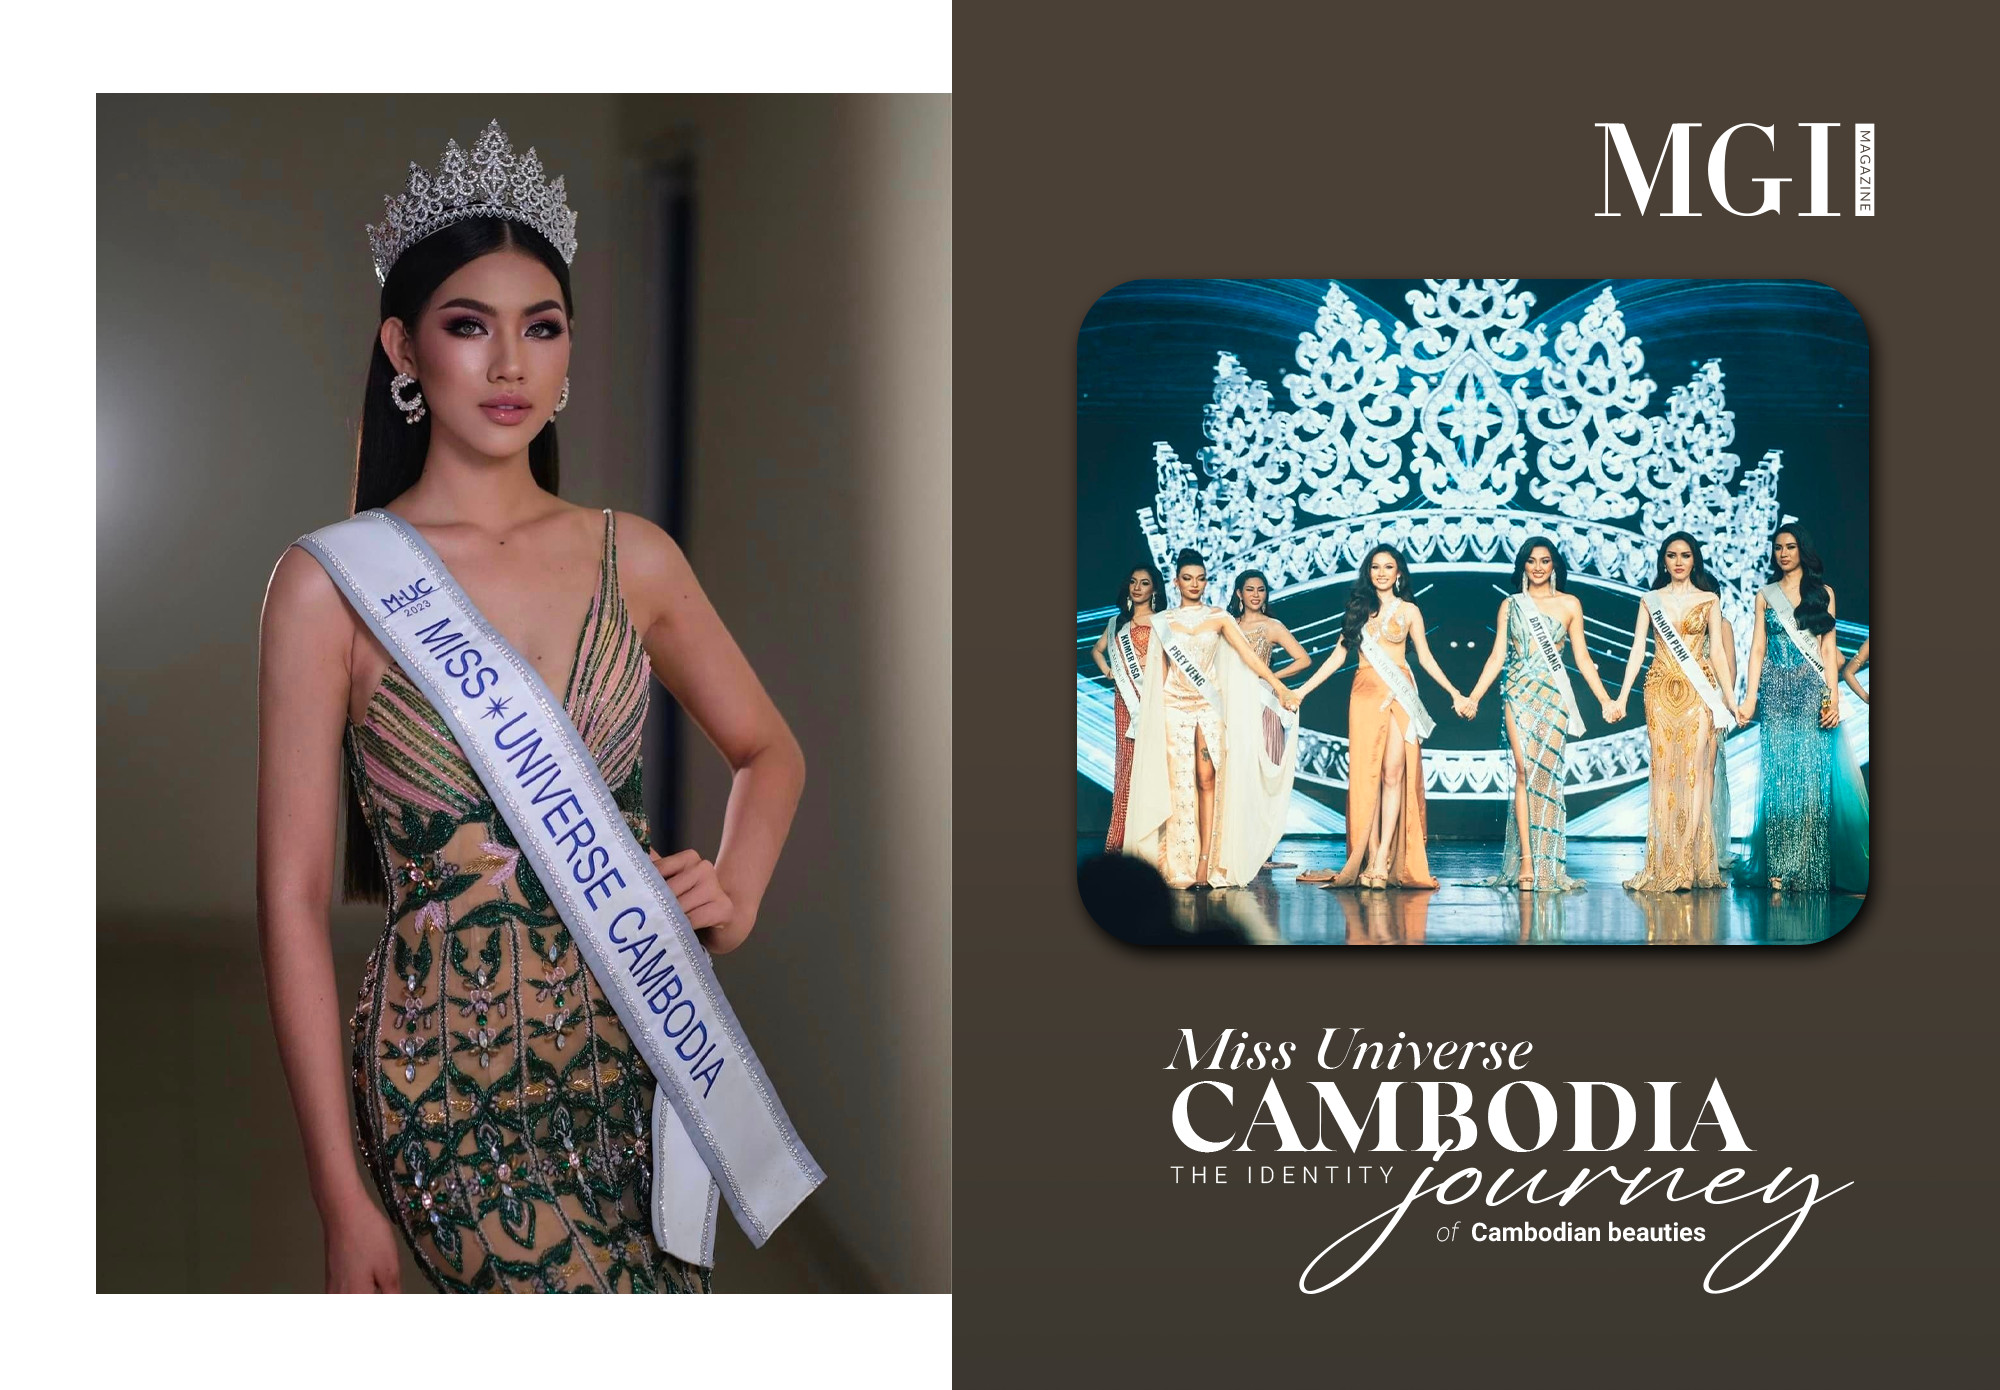 Miss Universe Cambodia - The identity journey of Cambodian beauties